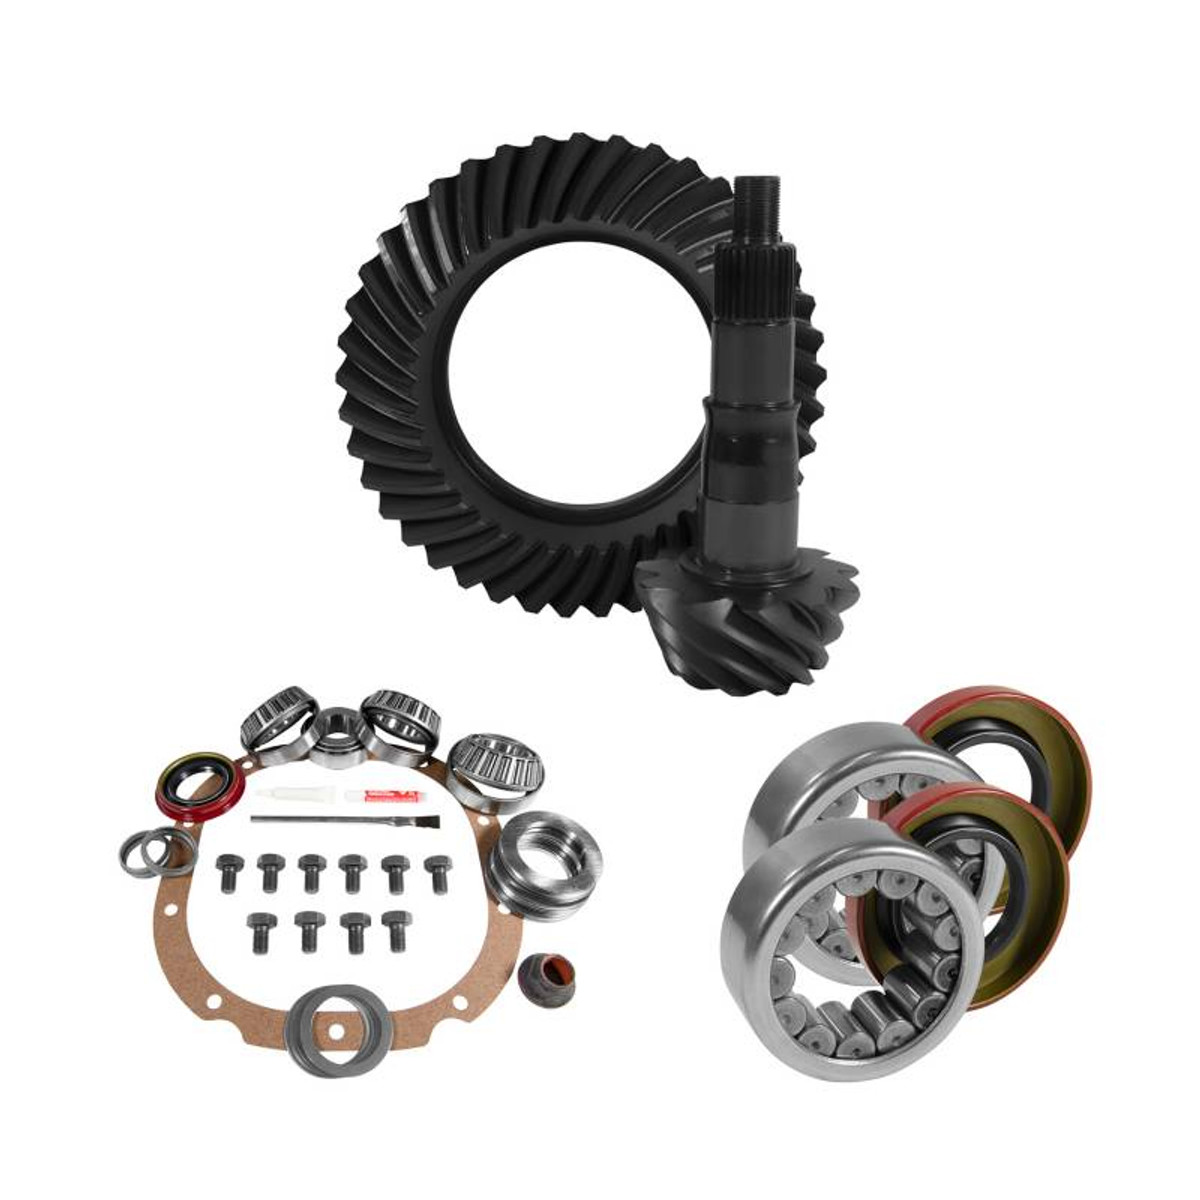 8.8 inch Ford 4.11 Rear Ring and Pinion Install Kit 2.99 inch OD Axle Bearings and Seals YGK2067